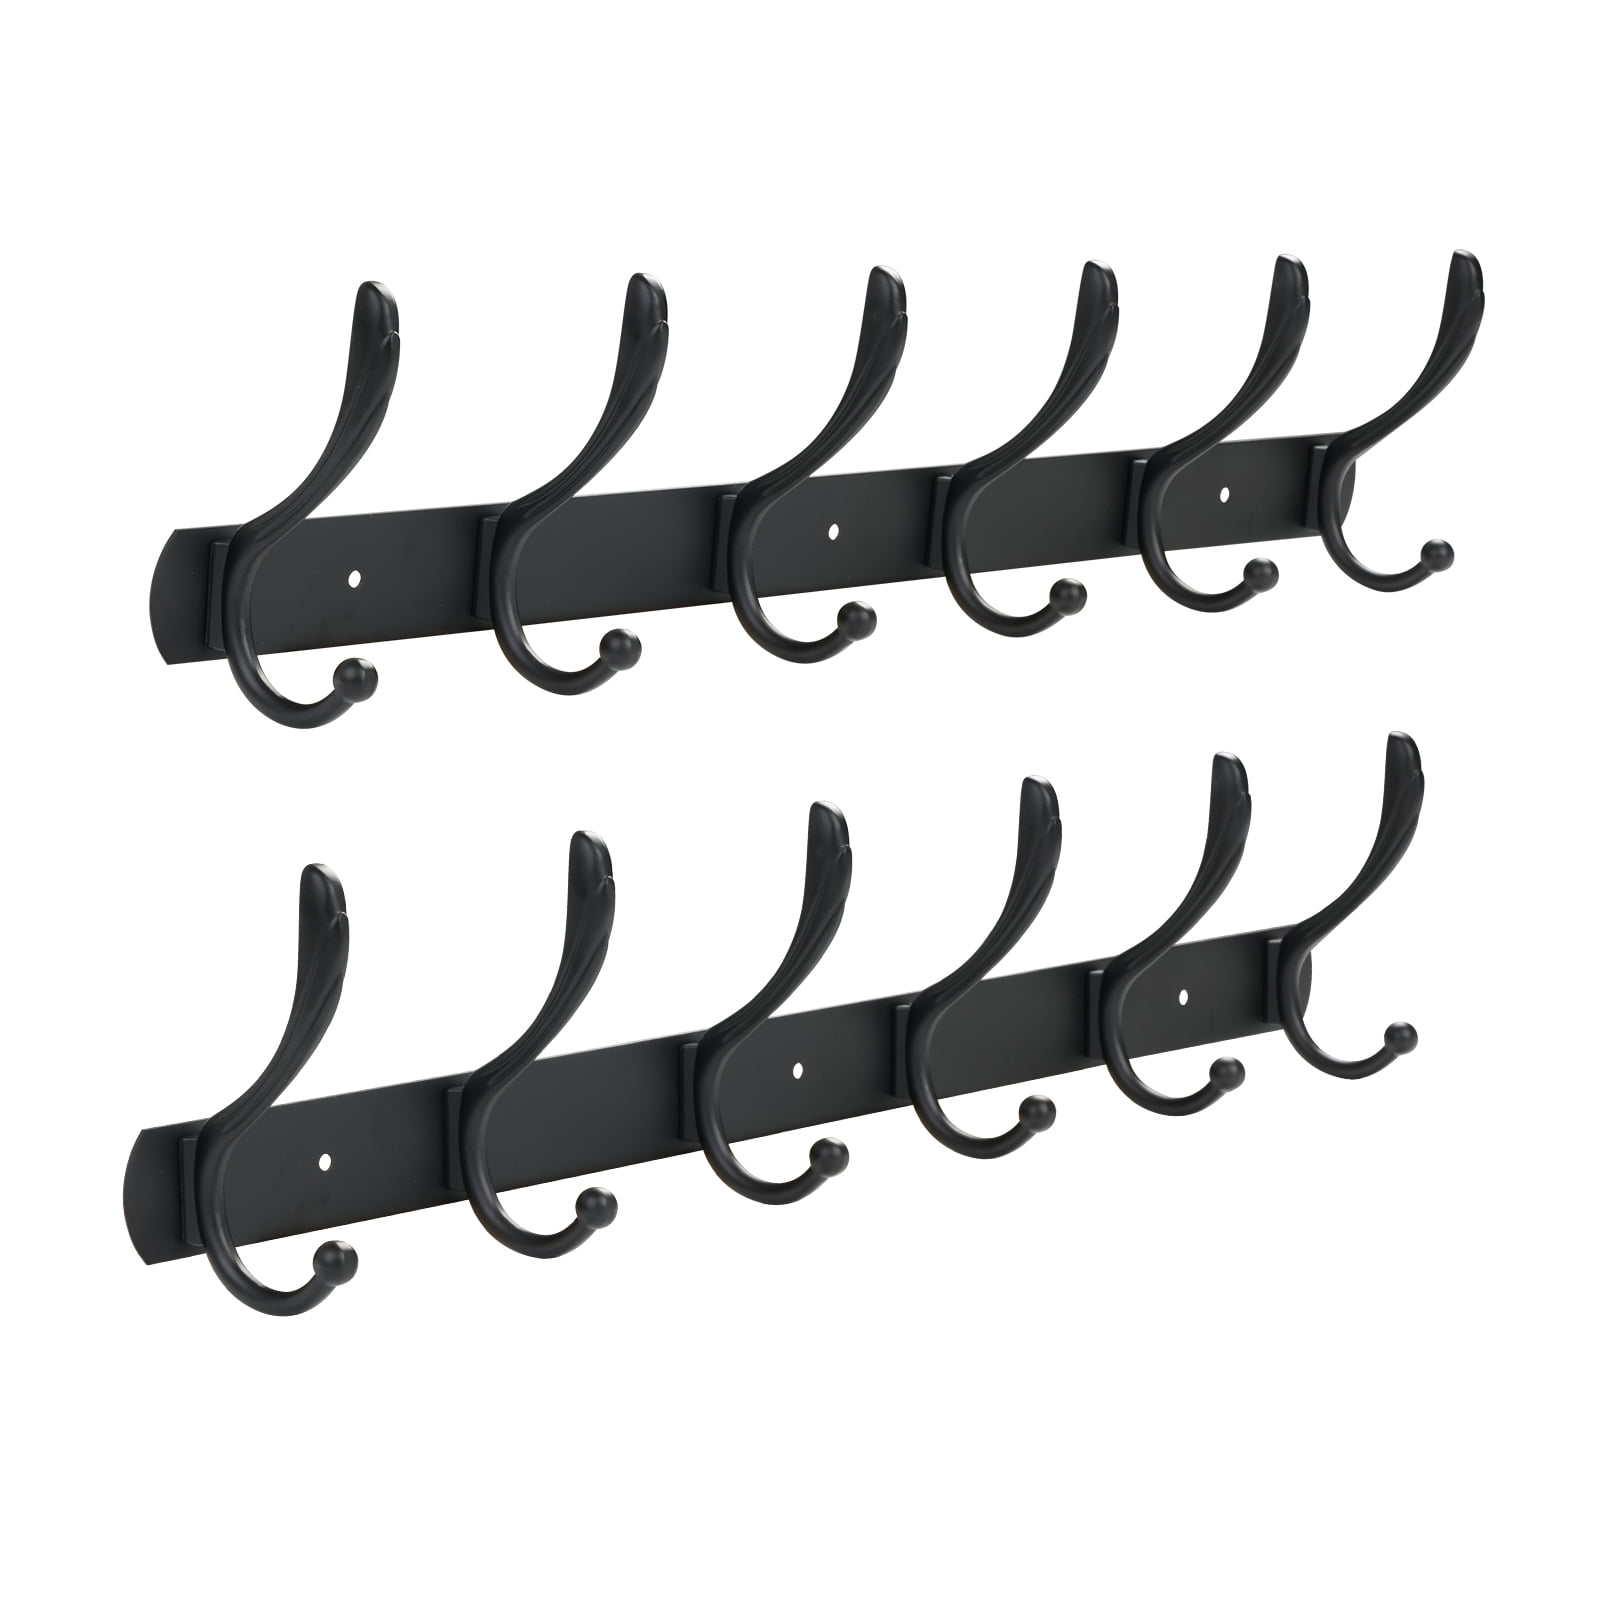 Coat Rack Wall Mounted, 2 Pack Wall Hooks for Coats, Heavy Duty Metal Coat  Hangers for Wall,6 Hooks for Purse Clothes Jacket Backpack in Mudroom